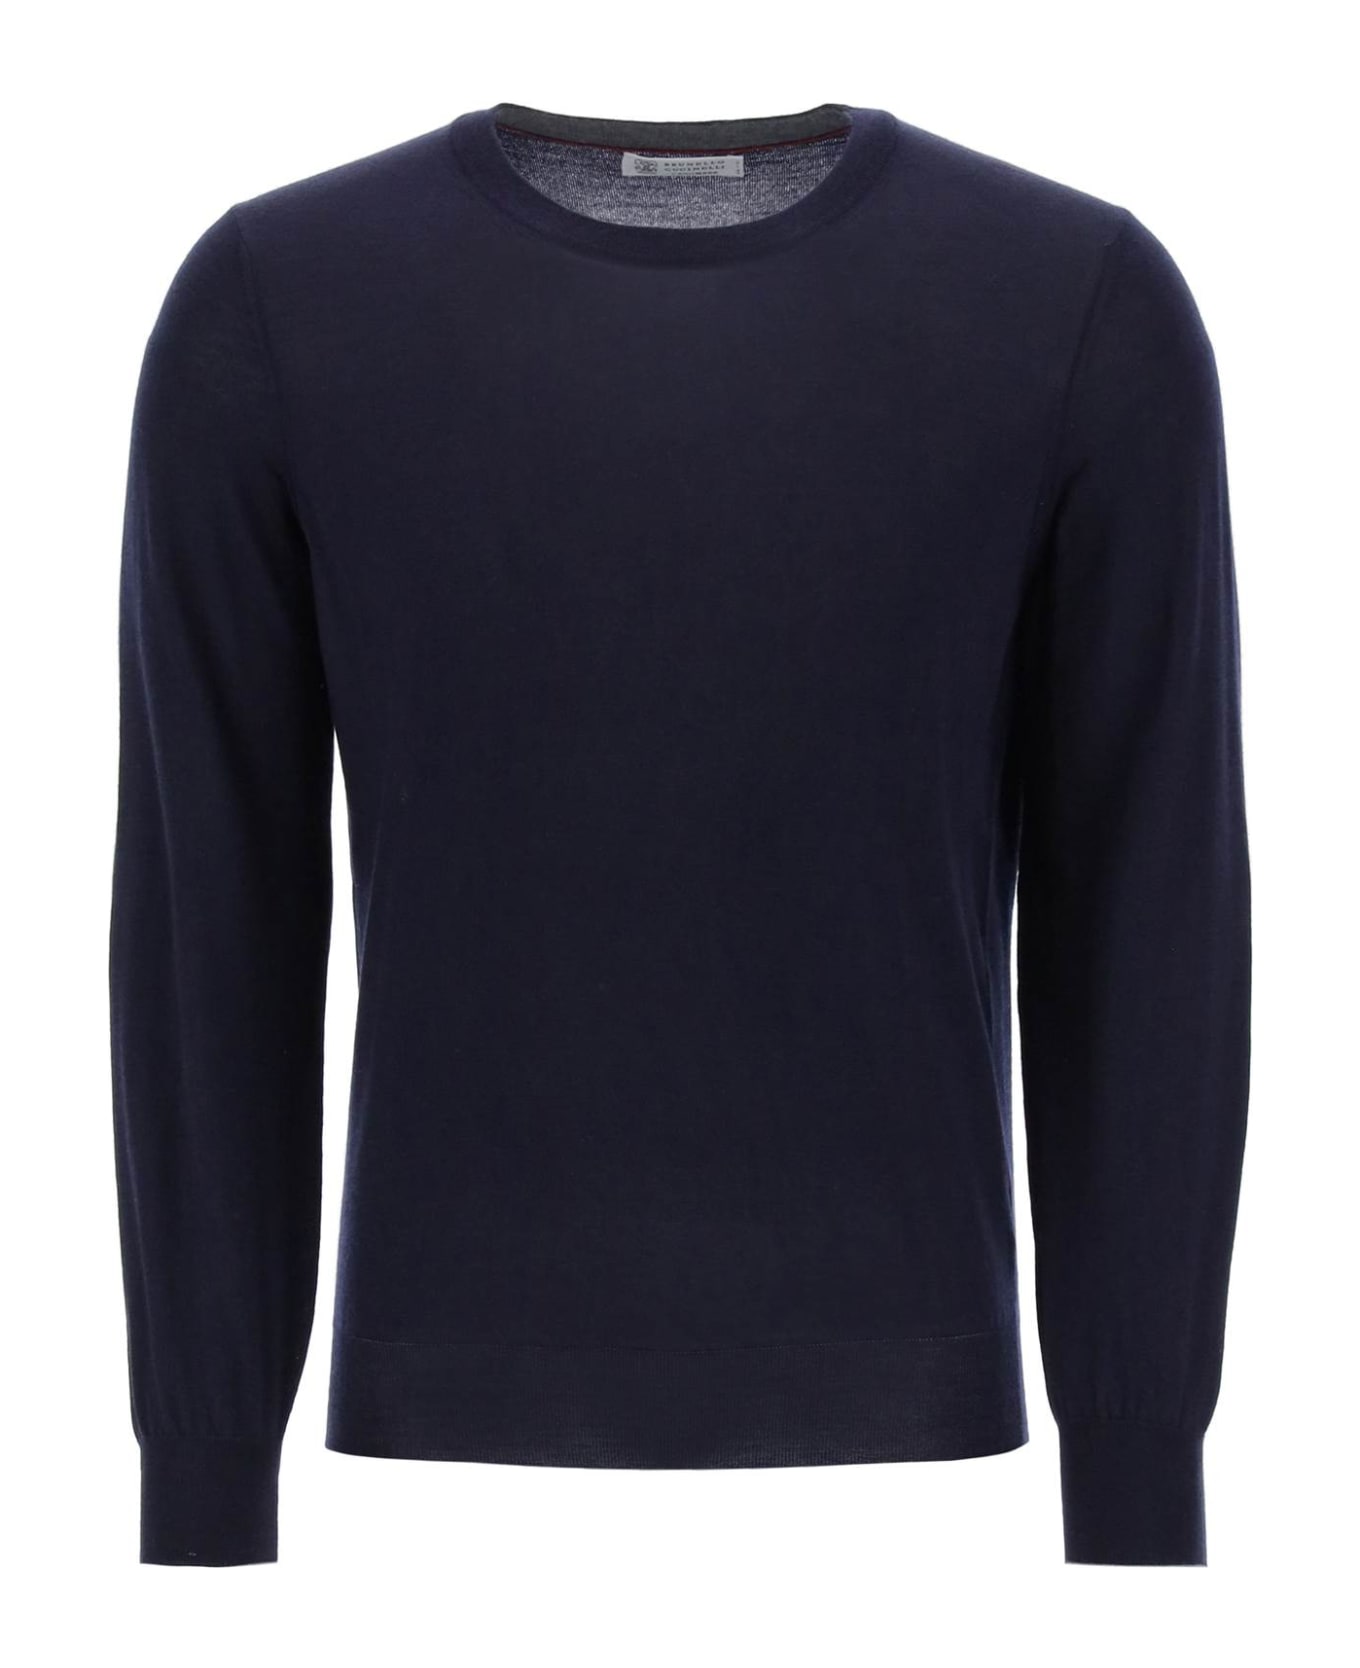 Brunello Cucinelli Wool And Cashmere Blend Sweater - Navy ニットウェア